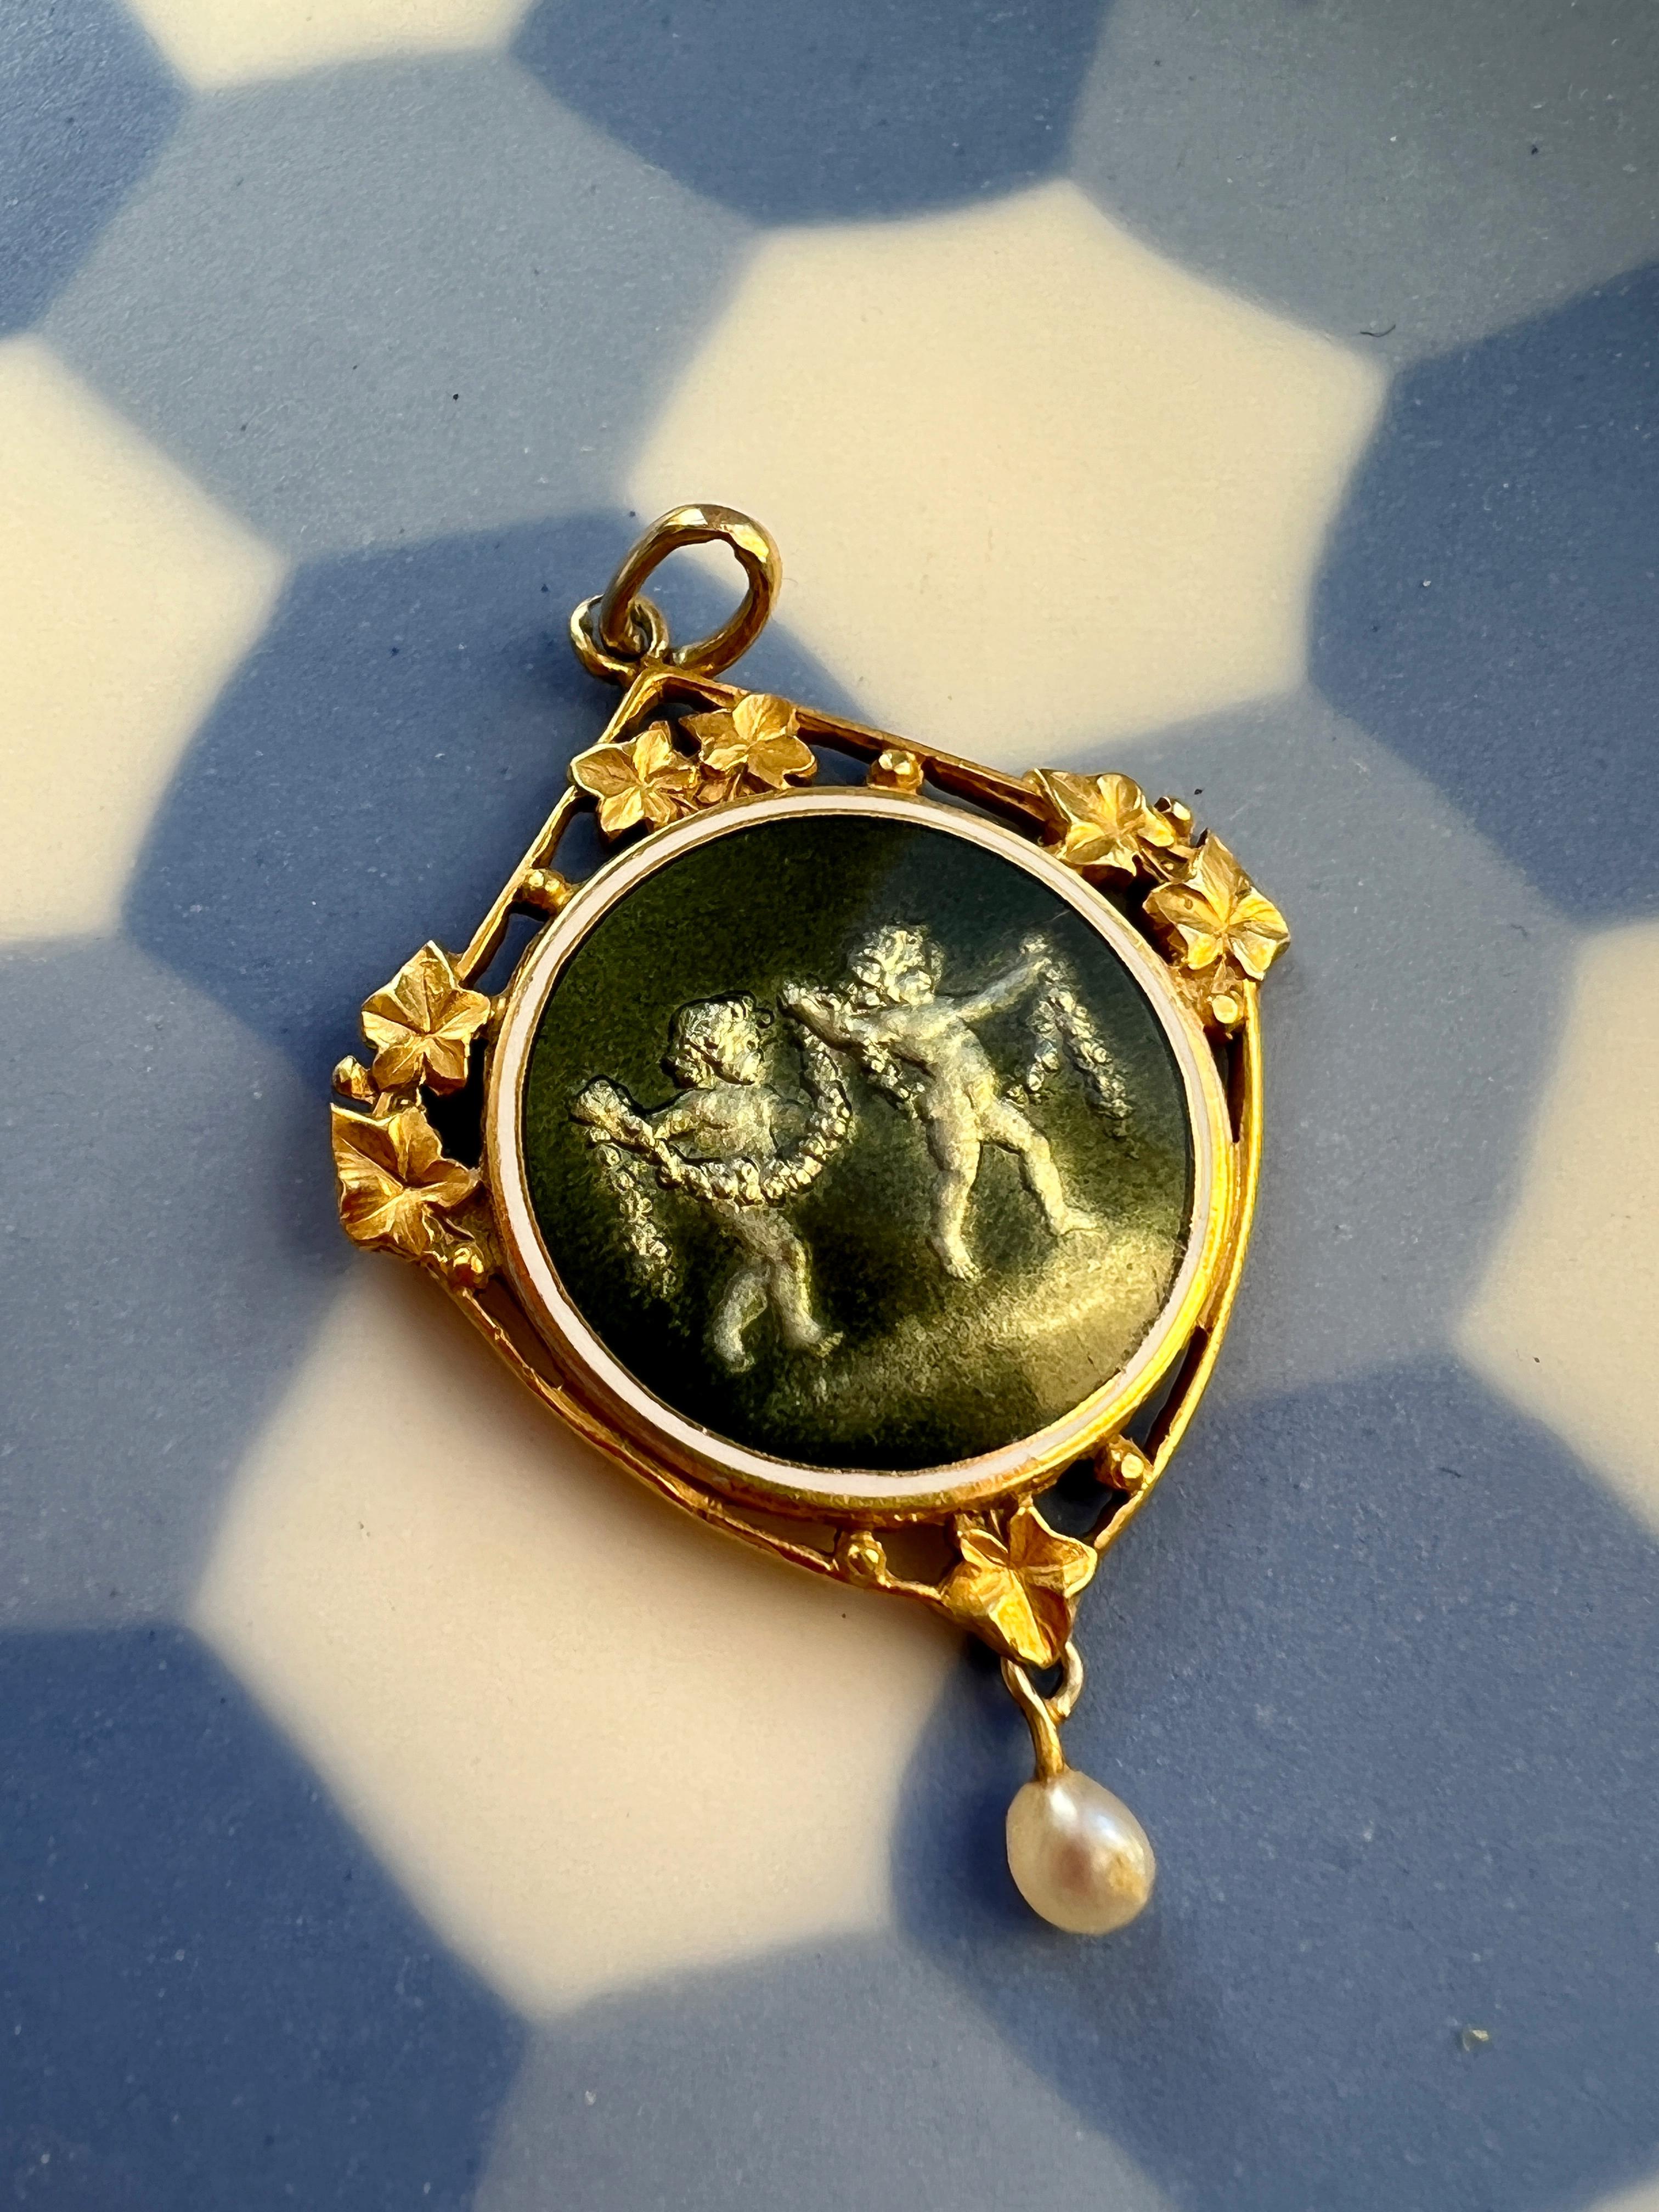 In front of us a very attractive and unusual Art Nouveau era 18K gold medal pendant, featuring a rare Swiss enamel in metallic colors: the color changes from an olive green to a mineral grey under different lightings. The enamel shows an intriguing